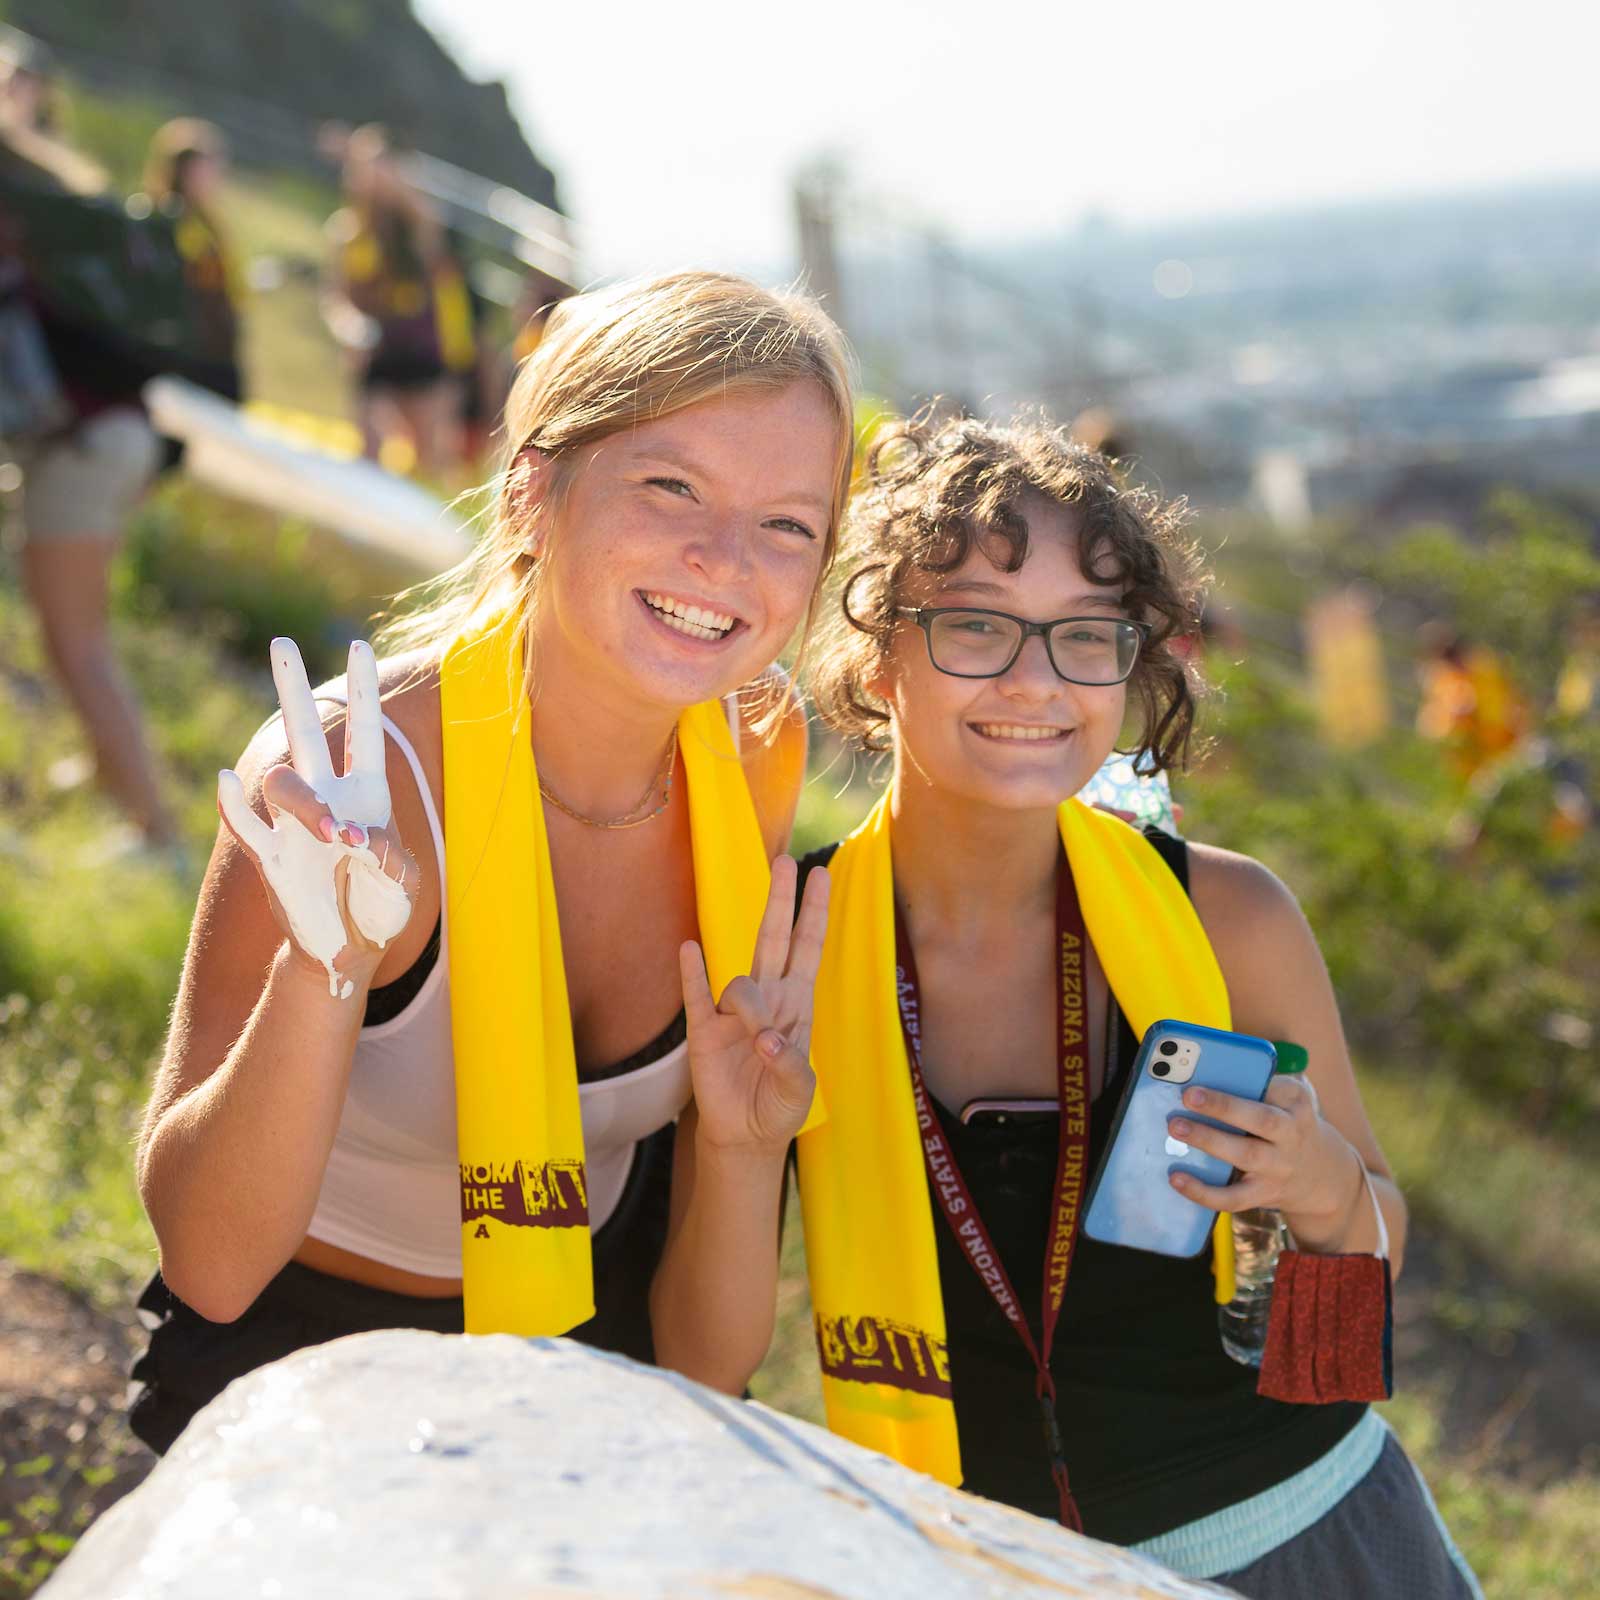 Two young women hold up white-painted hands in the ASU pitchfork gesture